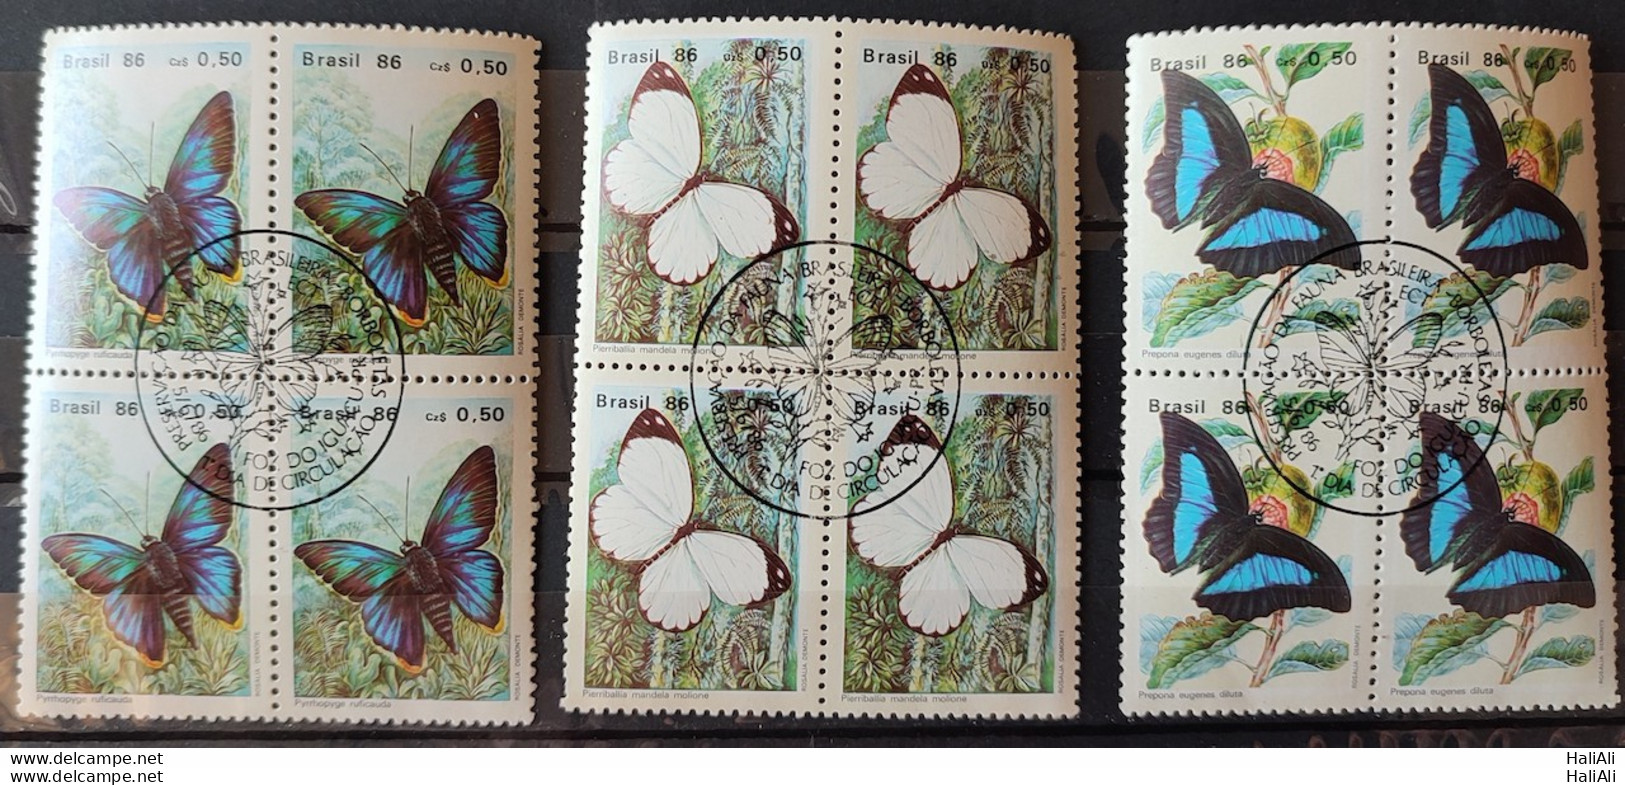 C 1512 Brazil Stamp Butterfly Insects 1986 Block Of 4 CBC PR Complete Series 2.jpg - Nuevos